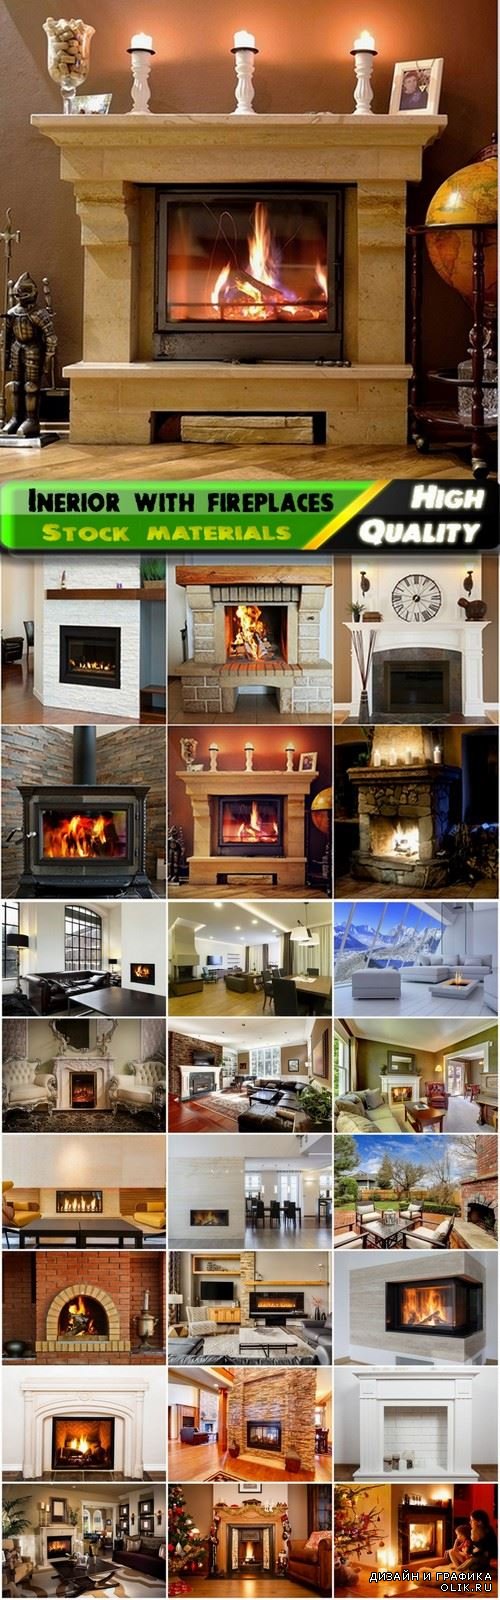 The interiors of the house with fireplaces - 25 HQ Jpg